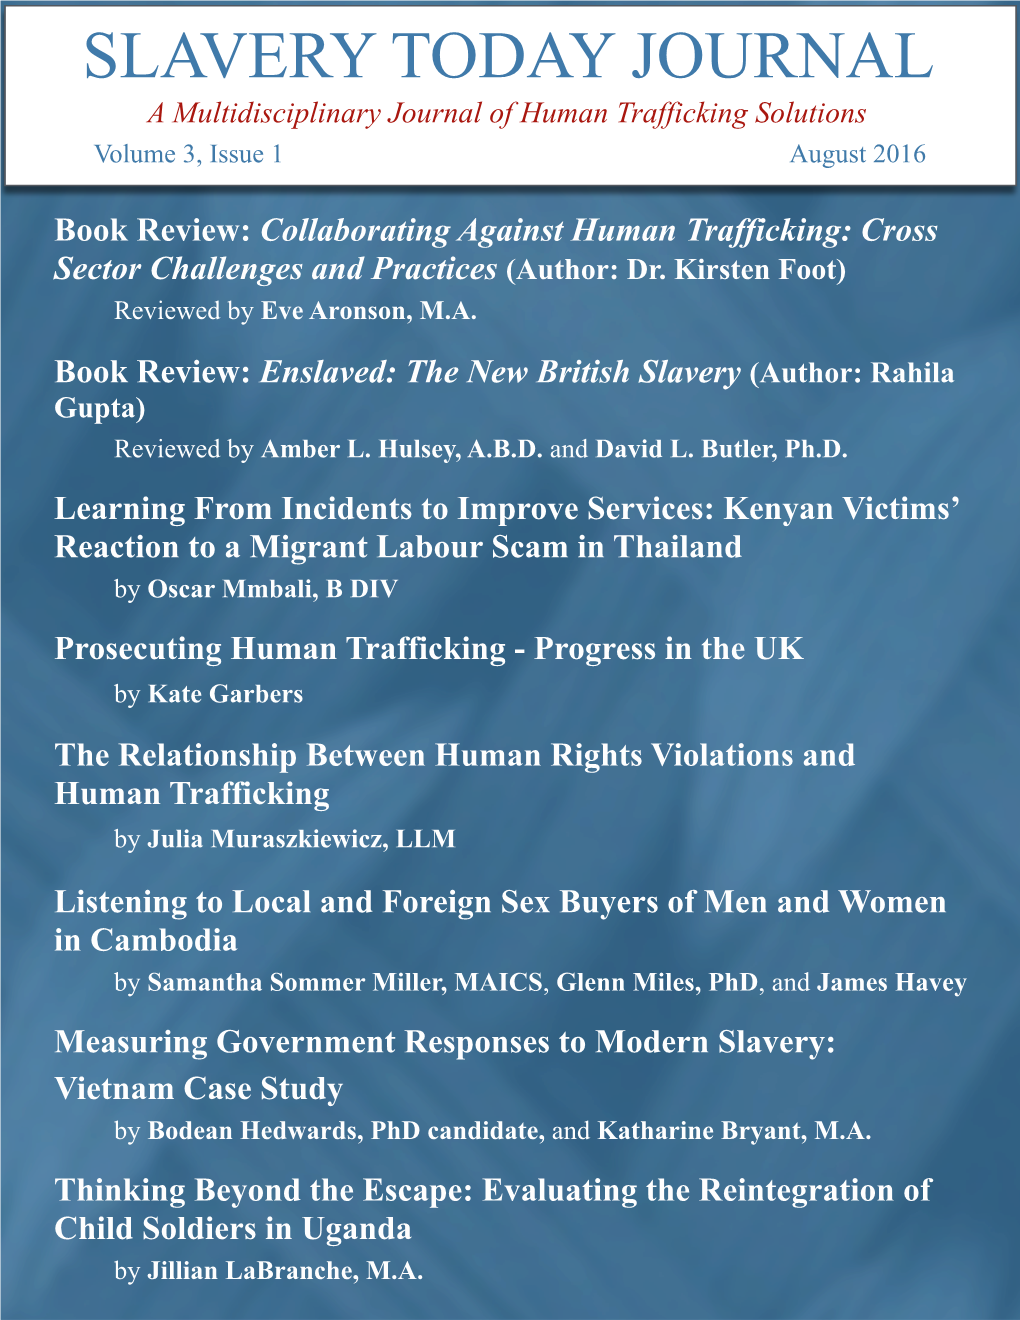 SLAVERY TODAY JOURNAL a Multidisciplinary Journal of Human Trafficking Solutions Volume 3, Issue 1 August 2016